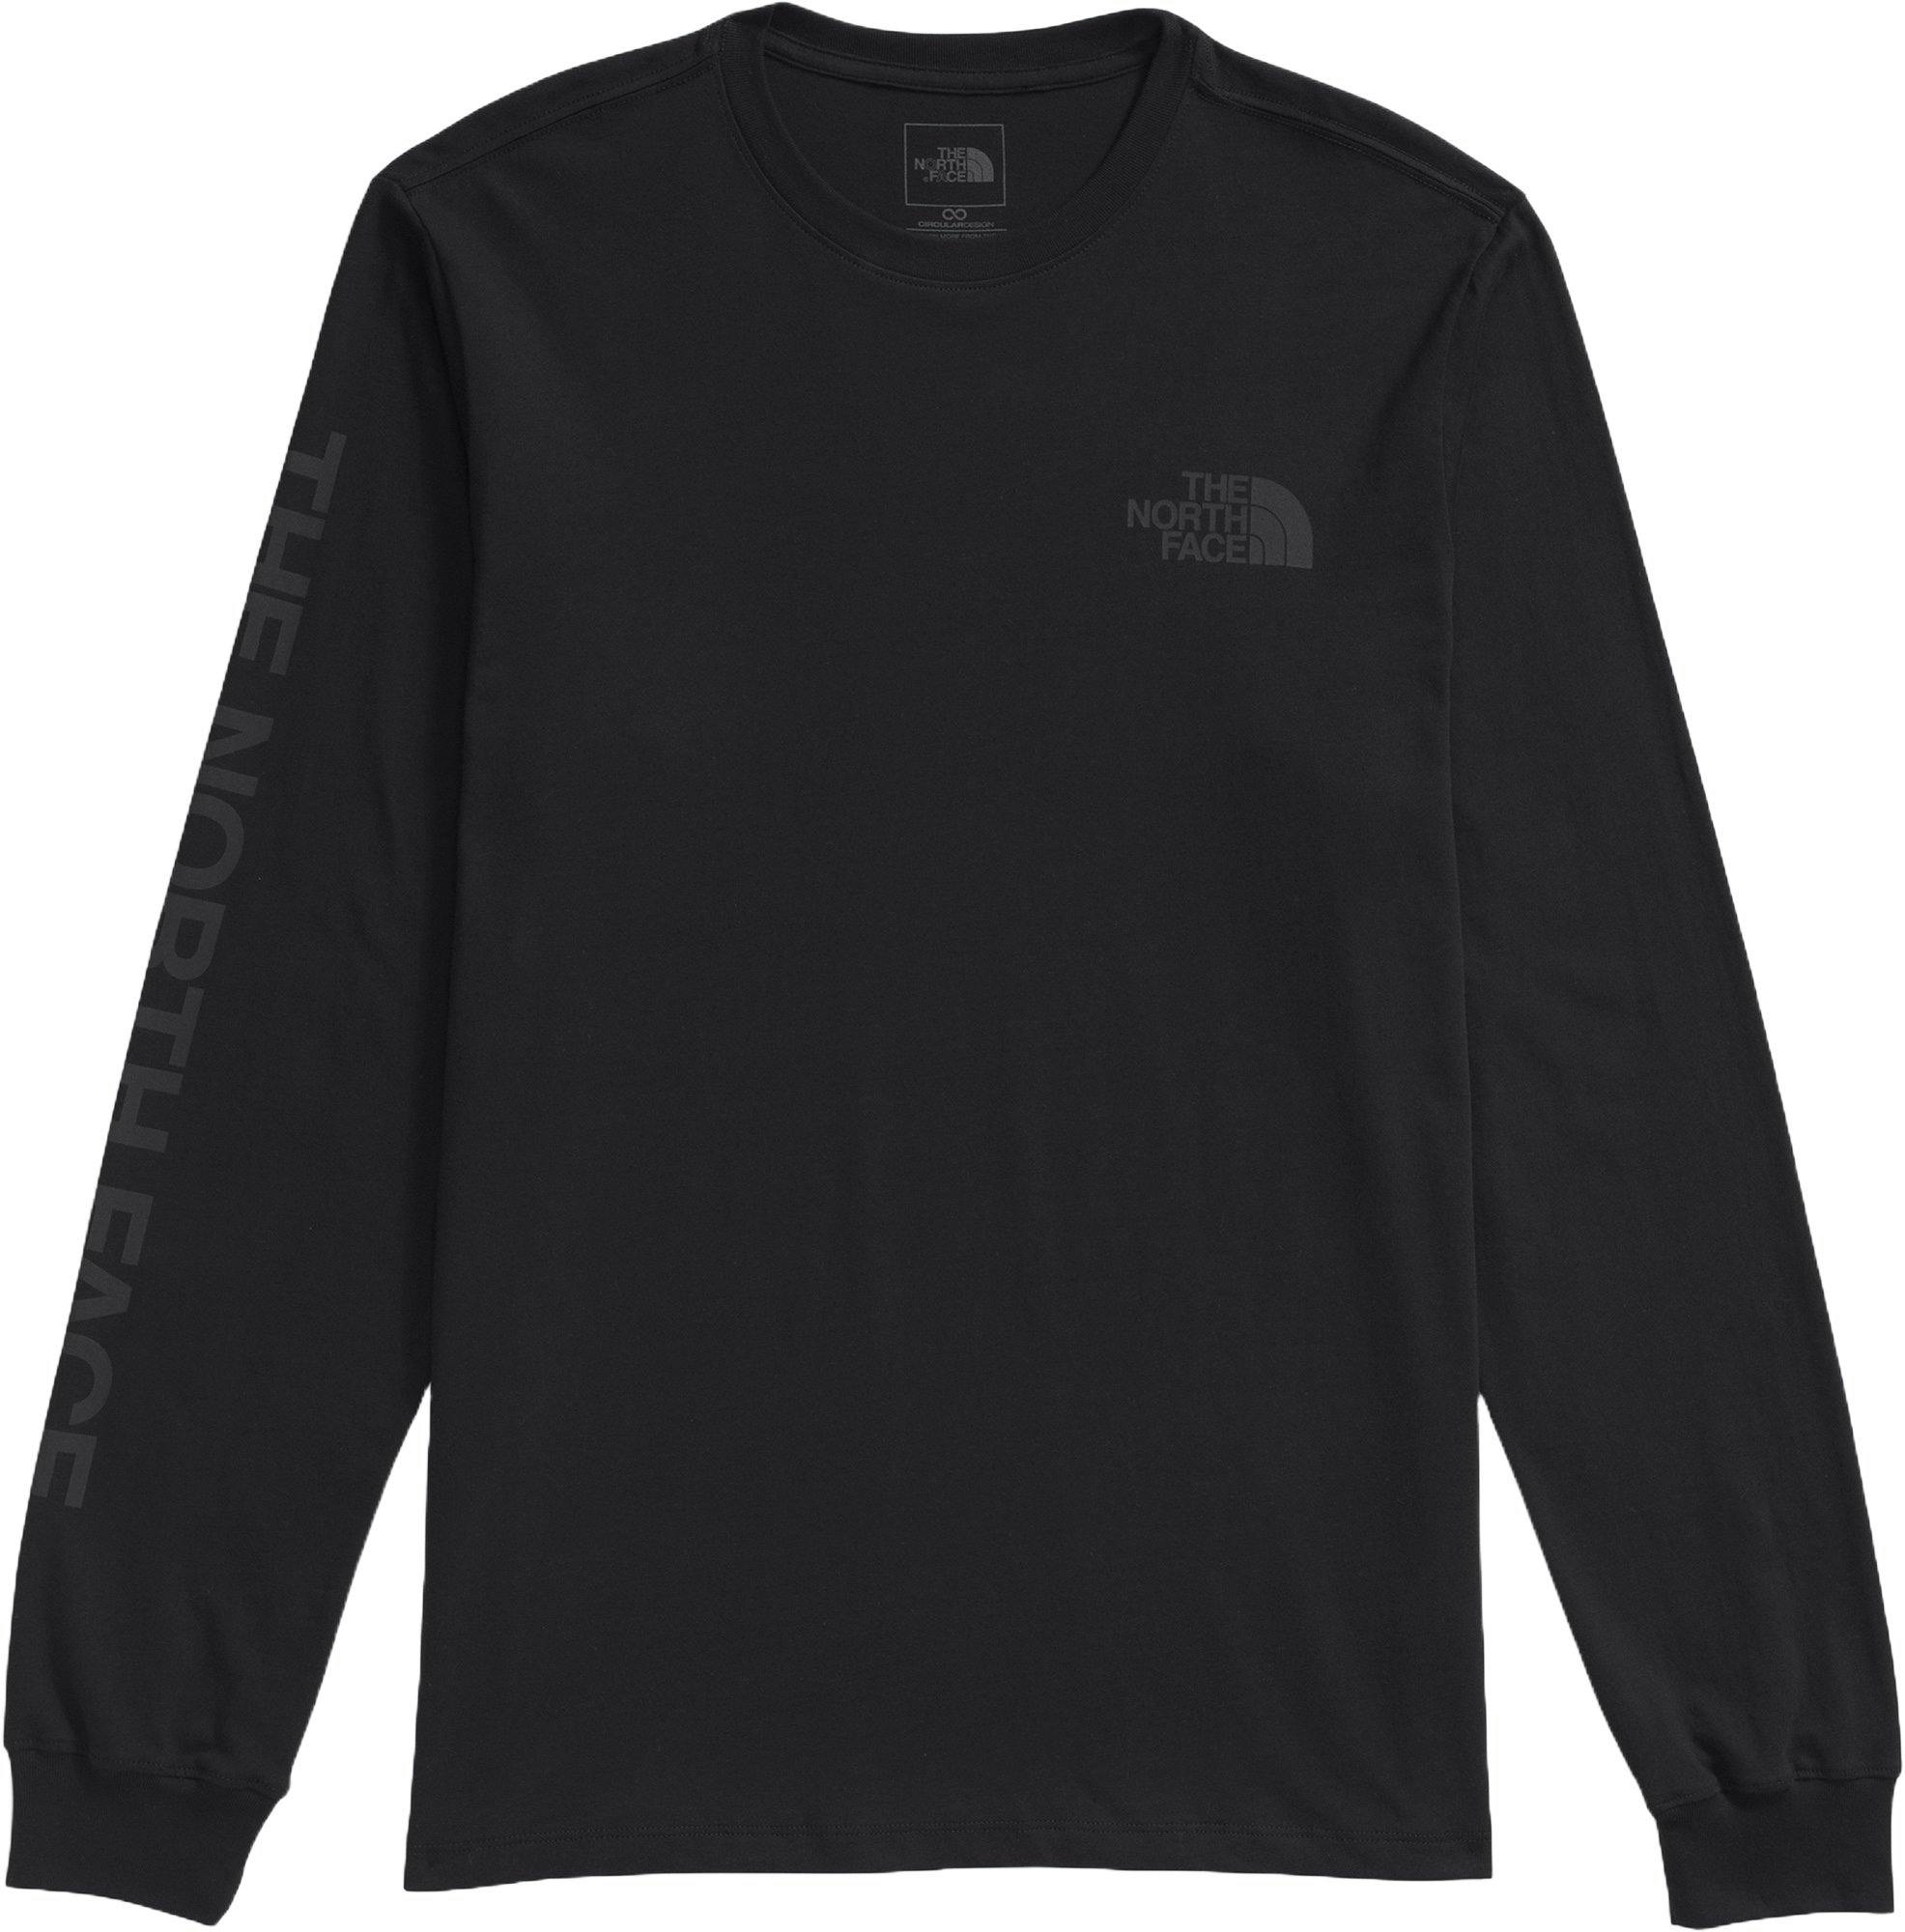 Product image for Long Sleeve Hit Graphic T-shirt - Men's